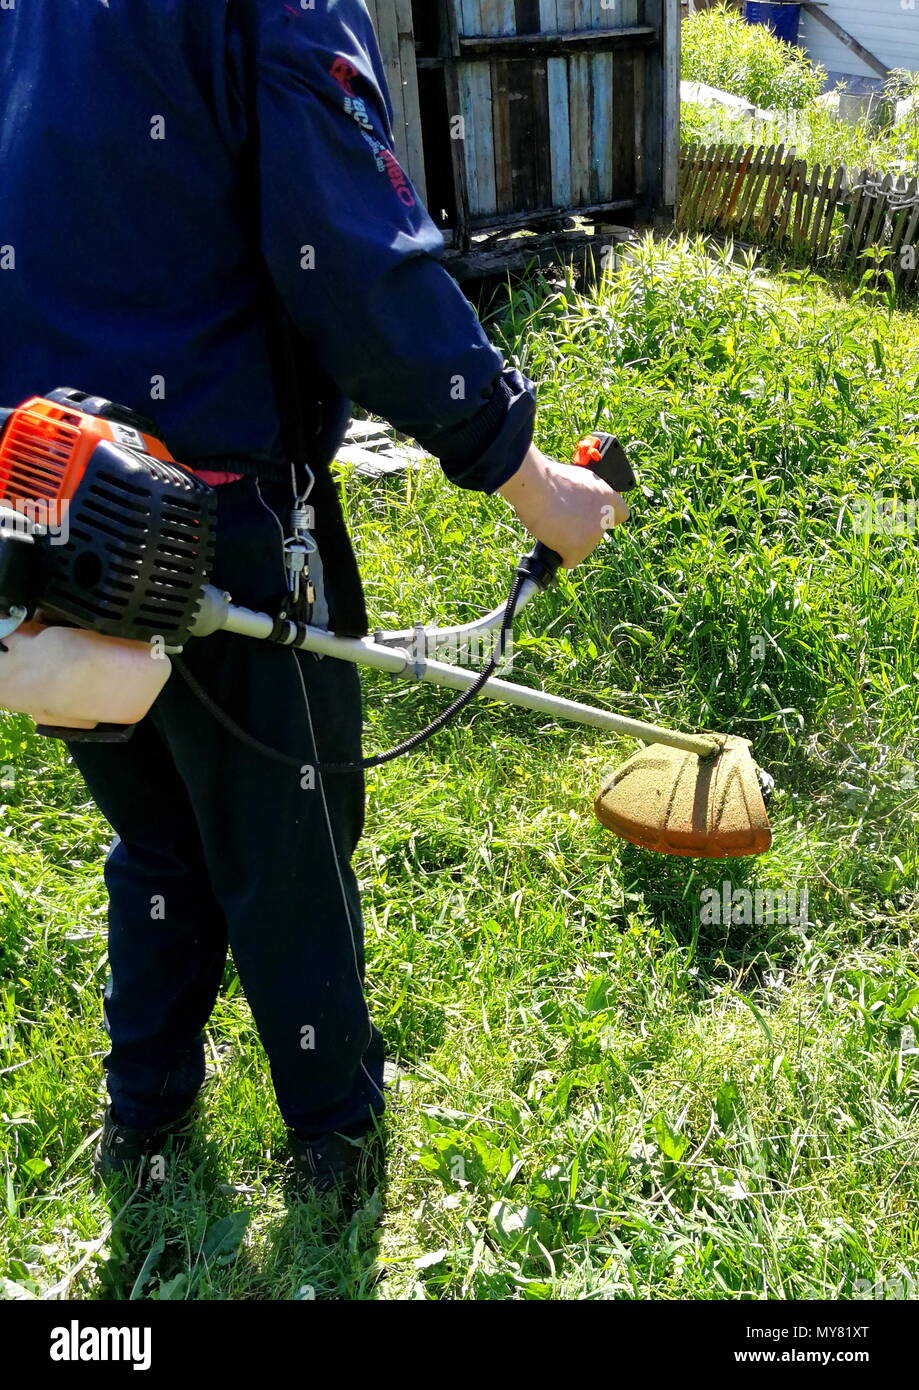 hand held lawn trimmer